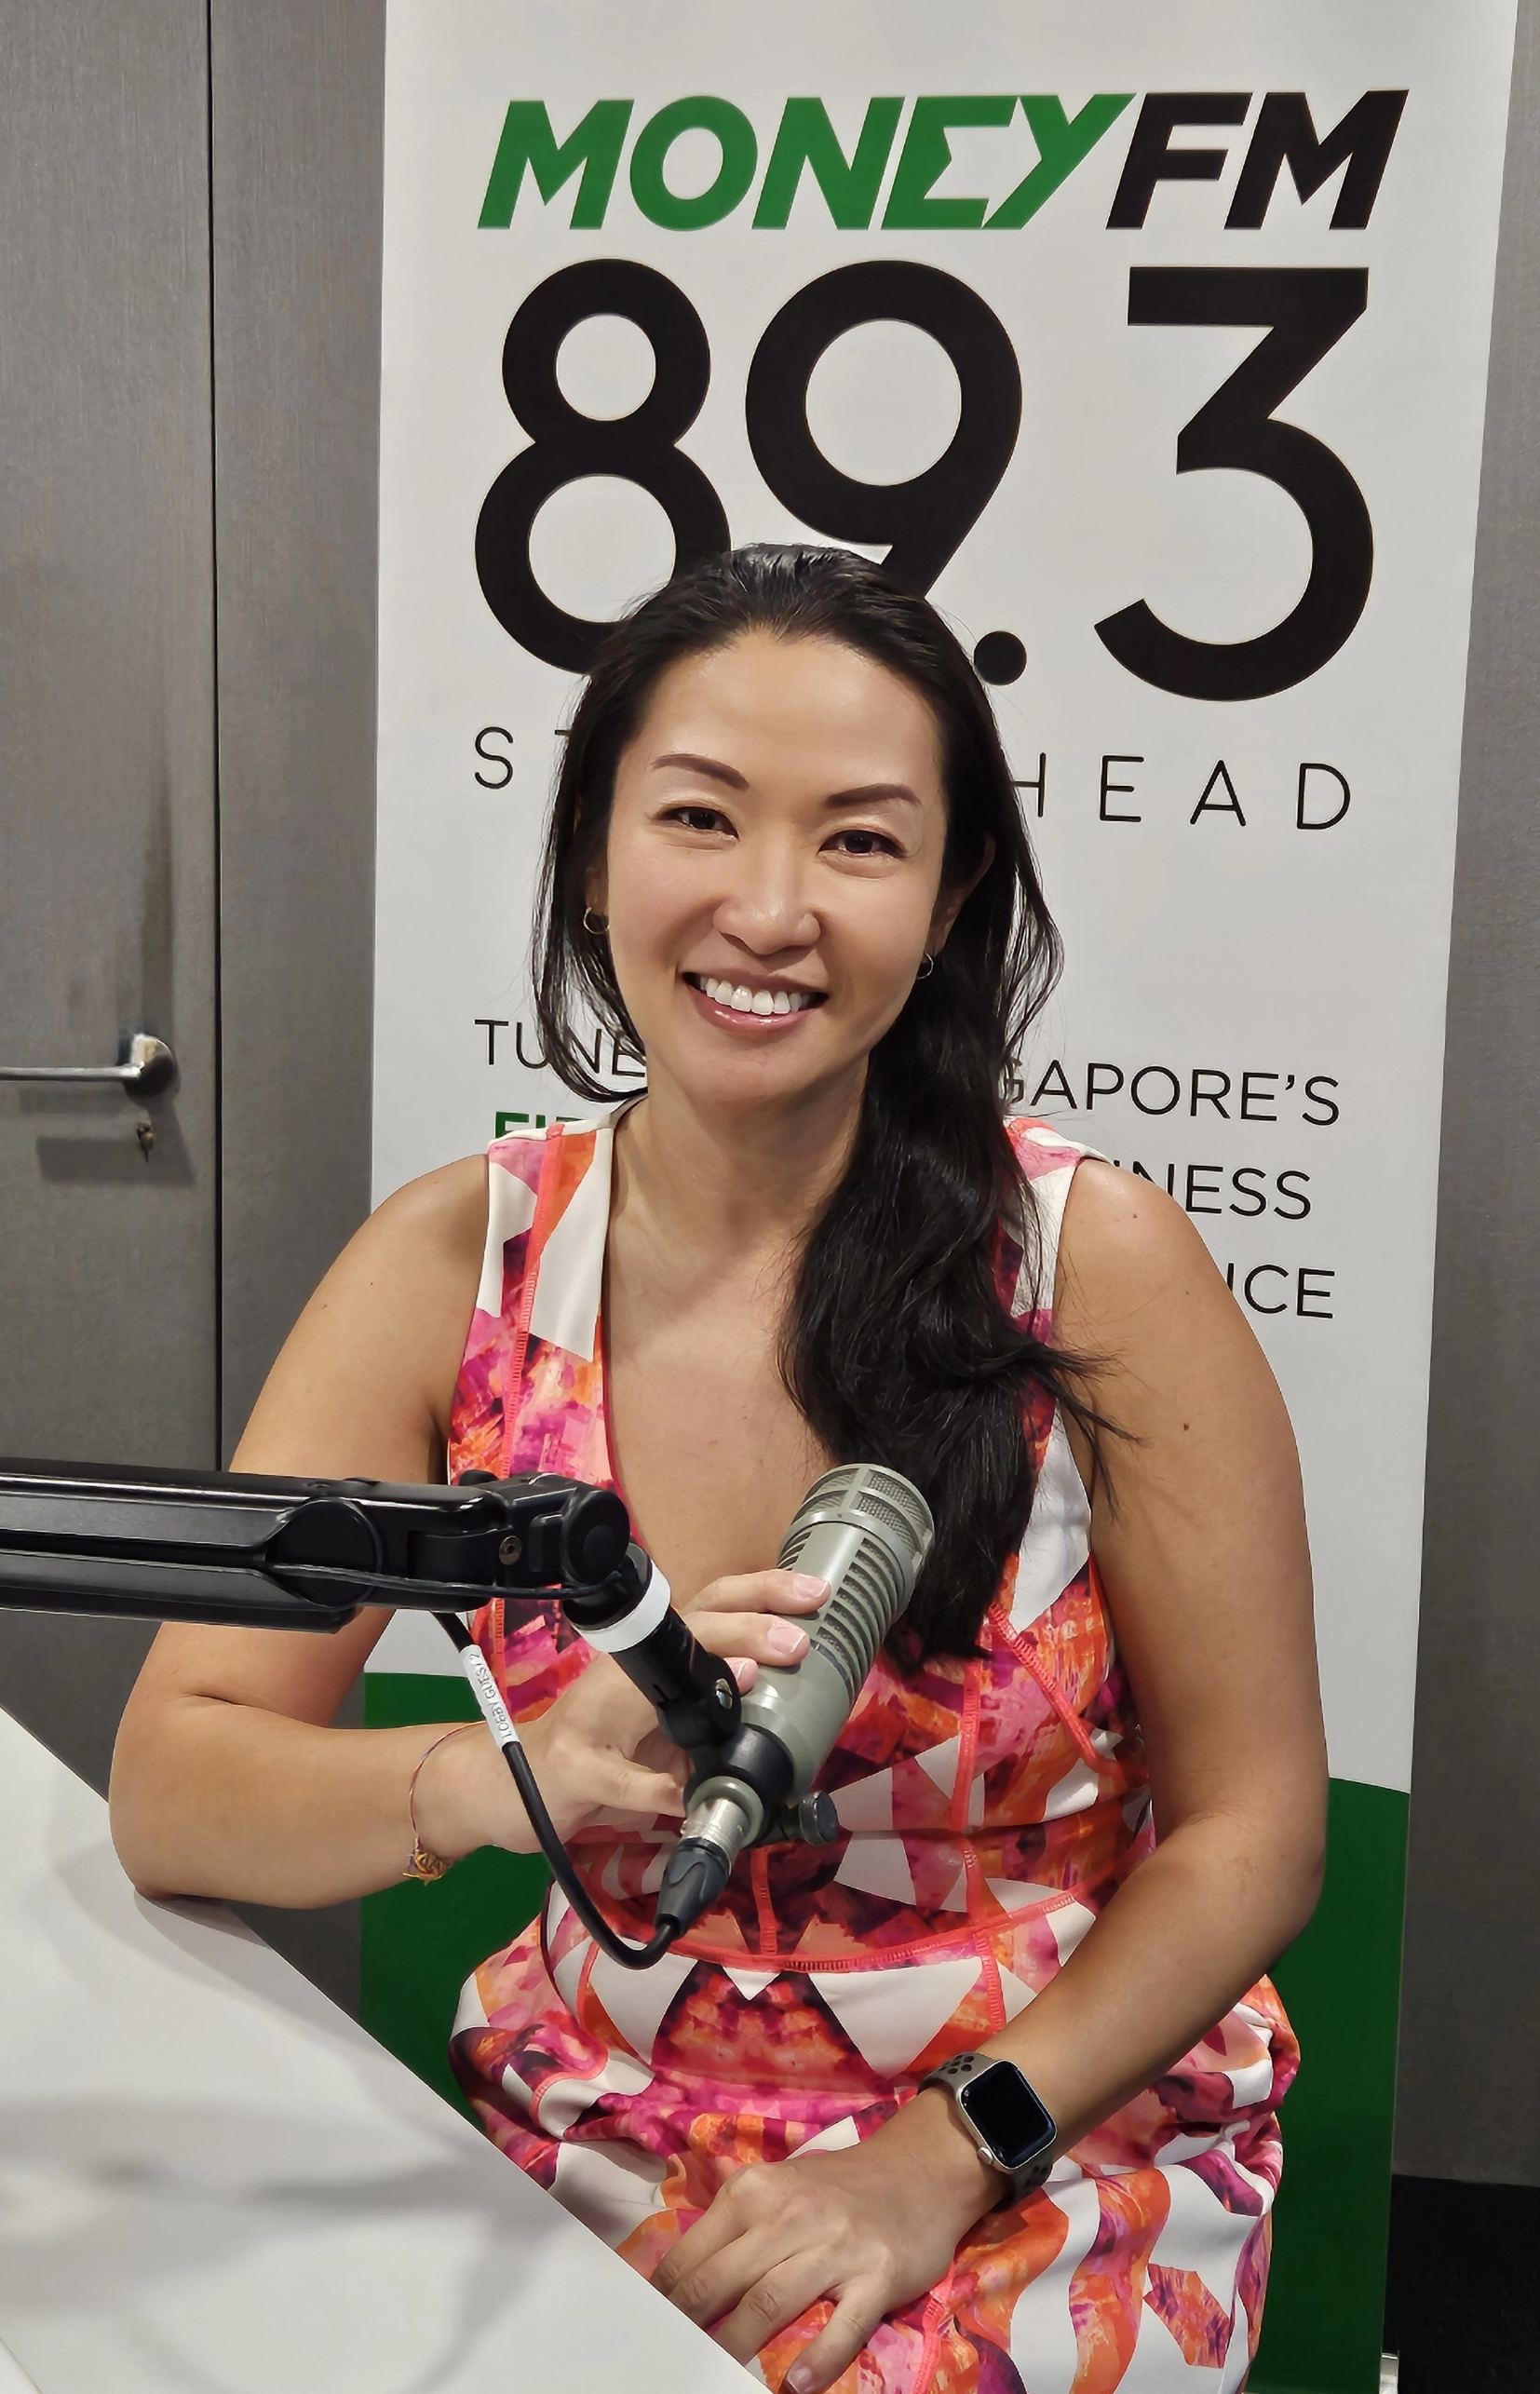 Saturday Mornings: "What’s  Your Story Slam" and the power of modern storytelling with Anna Ong